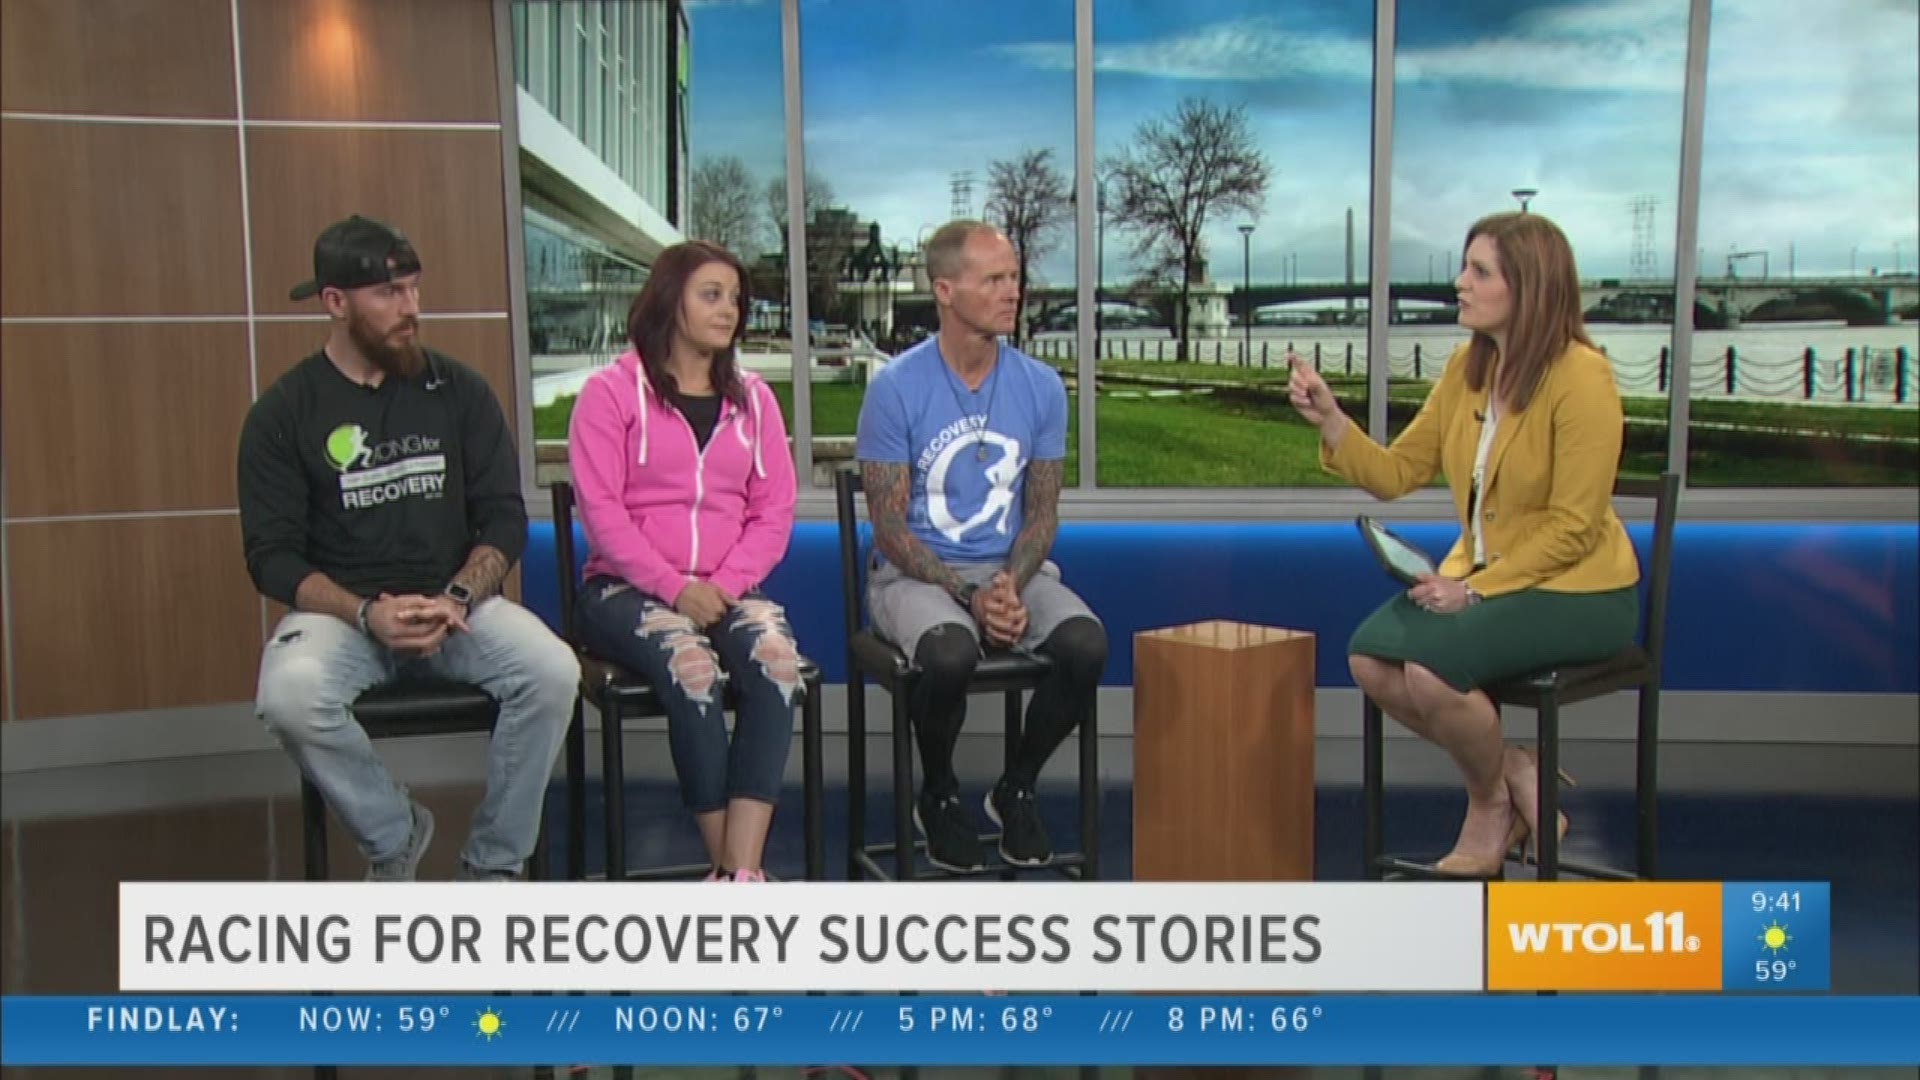 Todd Crandall, Megan Kelley and Dustin Werner share their success stories and how Racing for Recovery played a part.